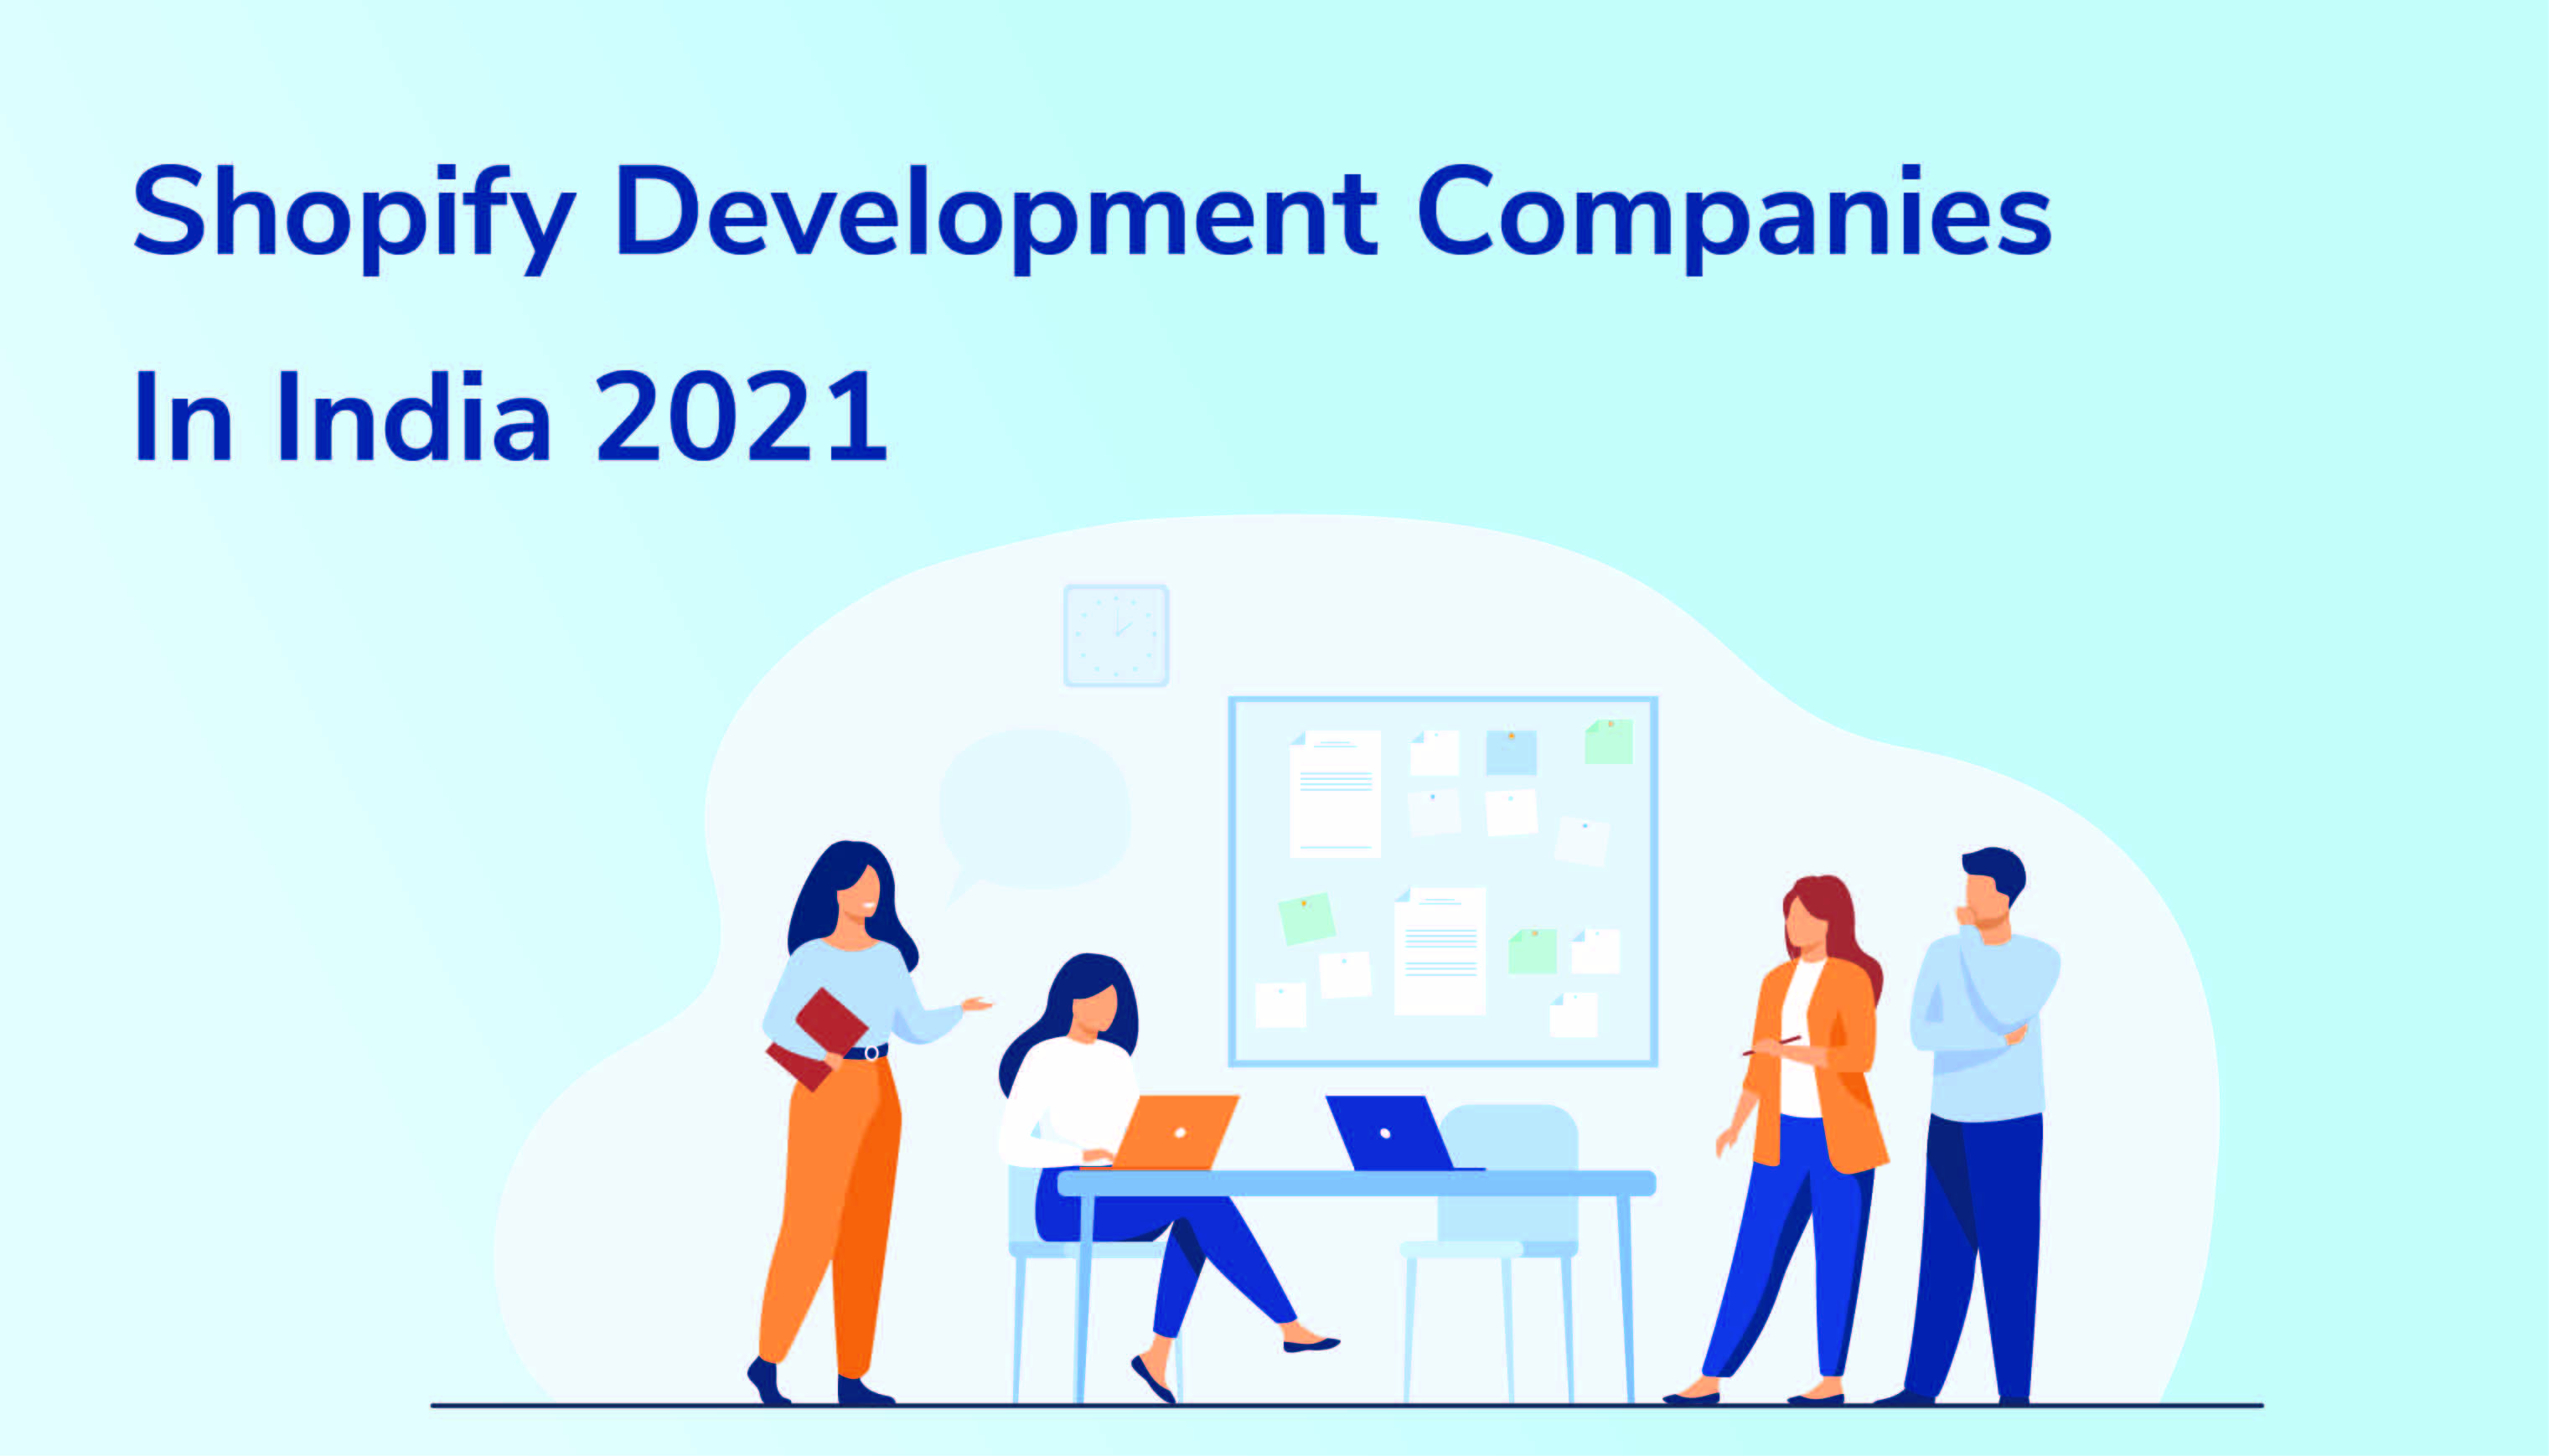 Top 10 Shopify Development Companies In India 2022